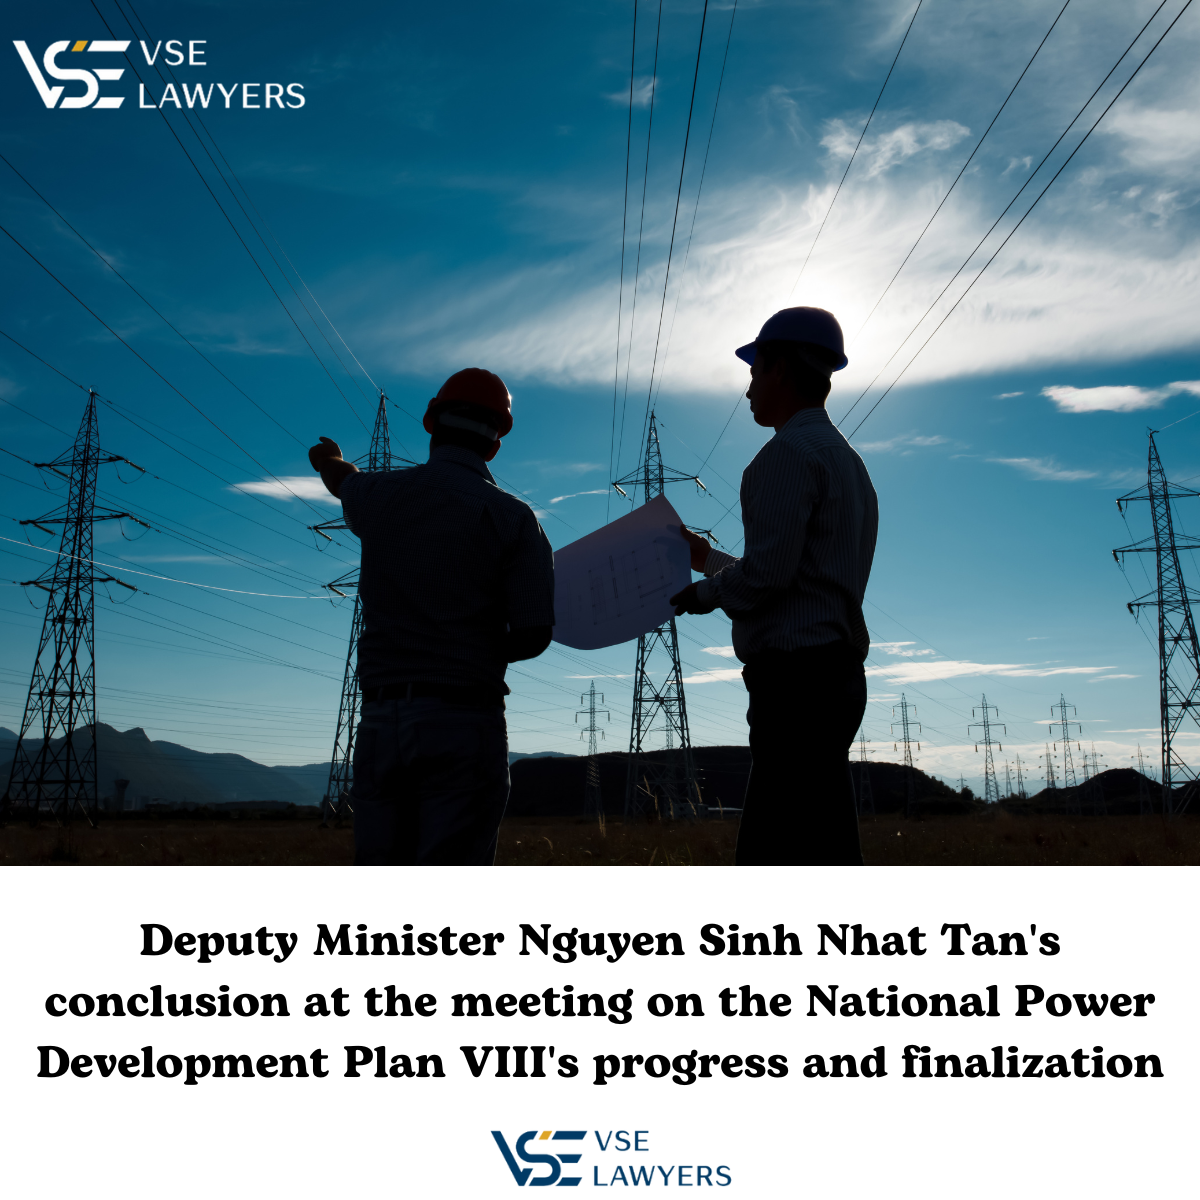 DEPUTY MINISTER NGUYEN SINH NHAT TAN'S CONCLUSION AT THE MEETING ON THE NATIONAL POWER DEVELOPMENT PLAN VIII'S PROGRESS AND FINALIZATION